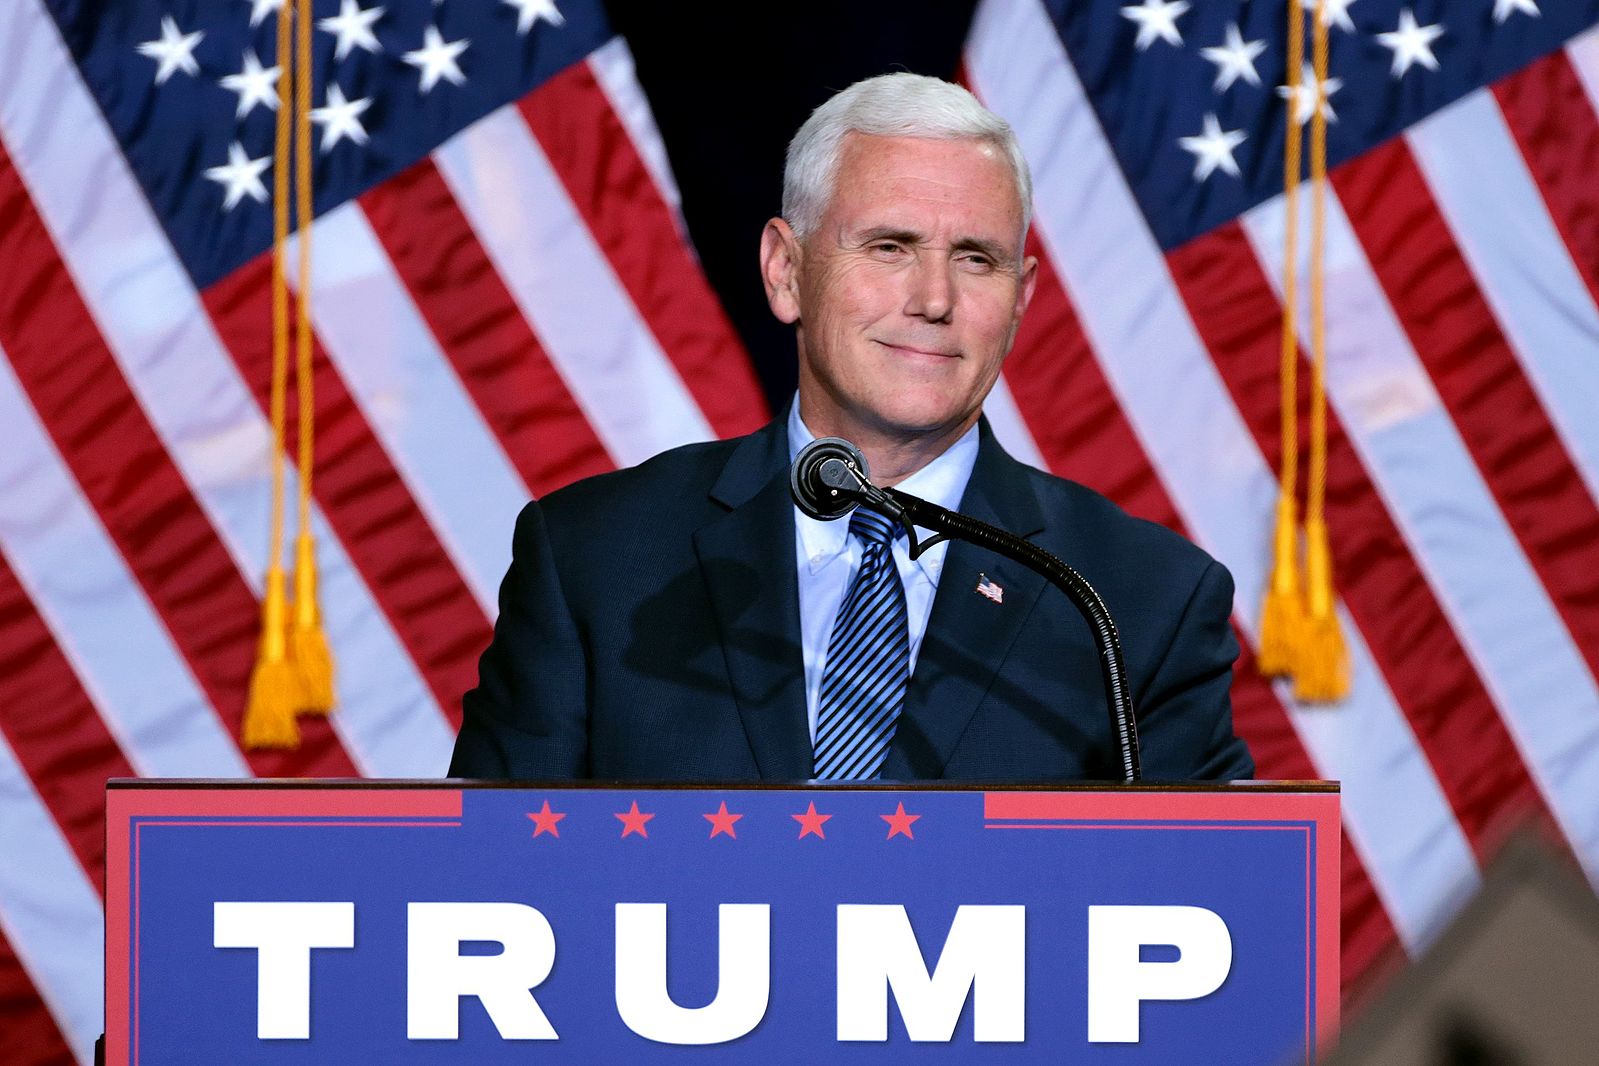 Mike_Pence_by_Gage_Skidmore_4